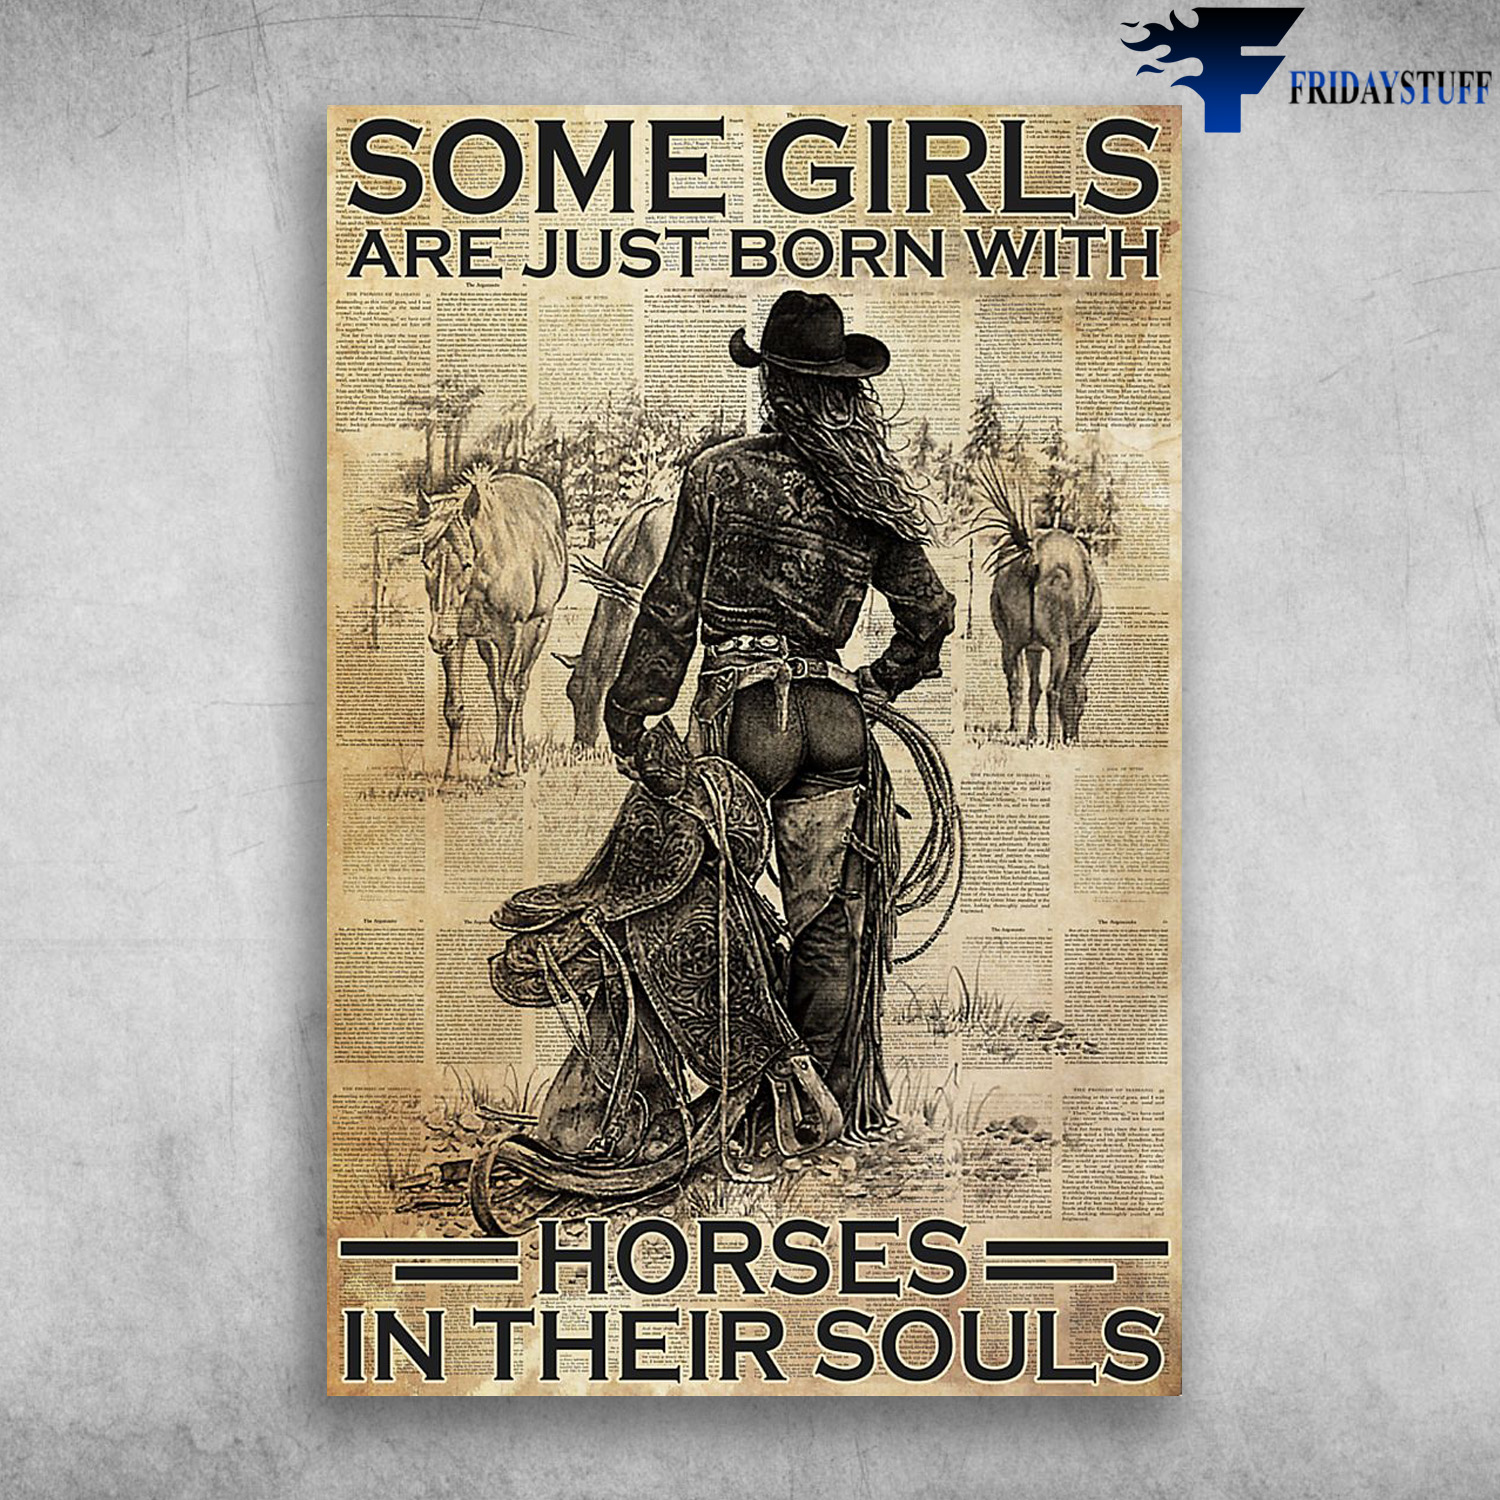 Cowgirl And The Horses - Some Girls Are Just Bor With Horses In Their Souls